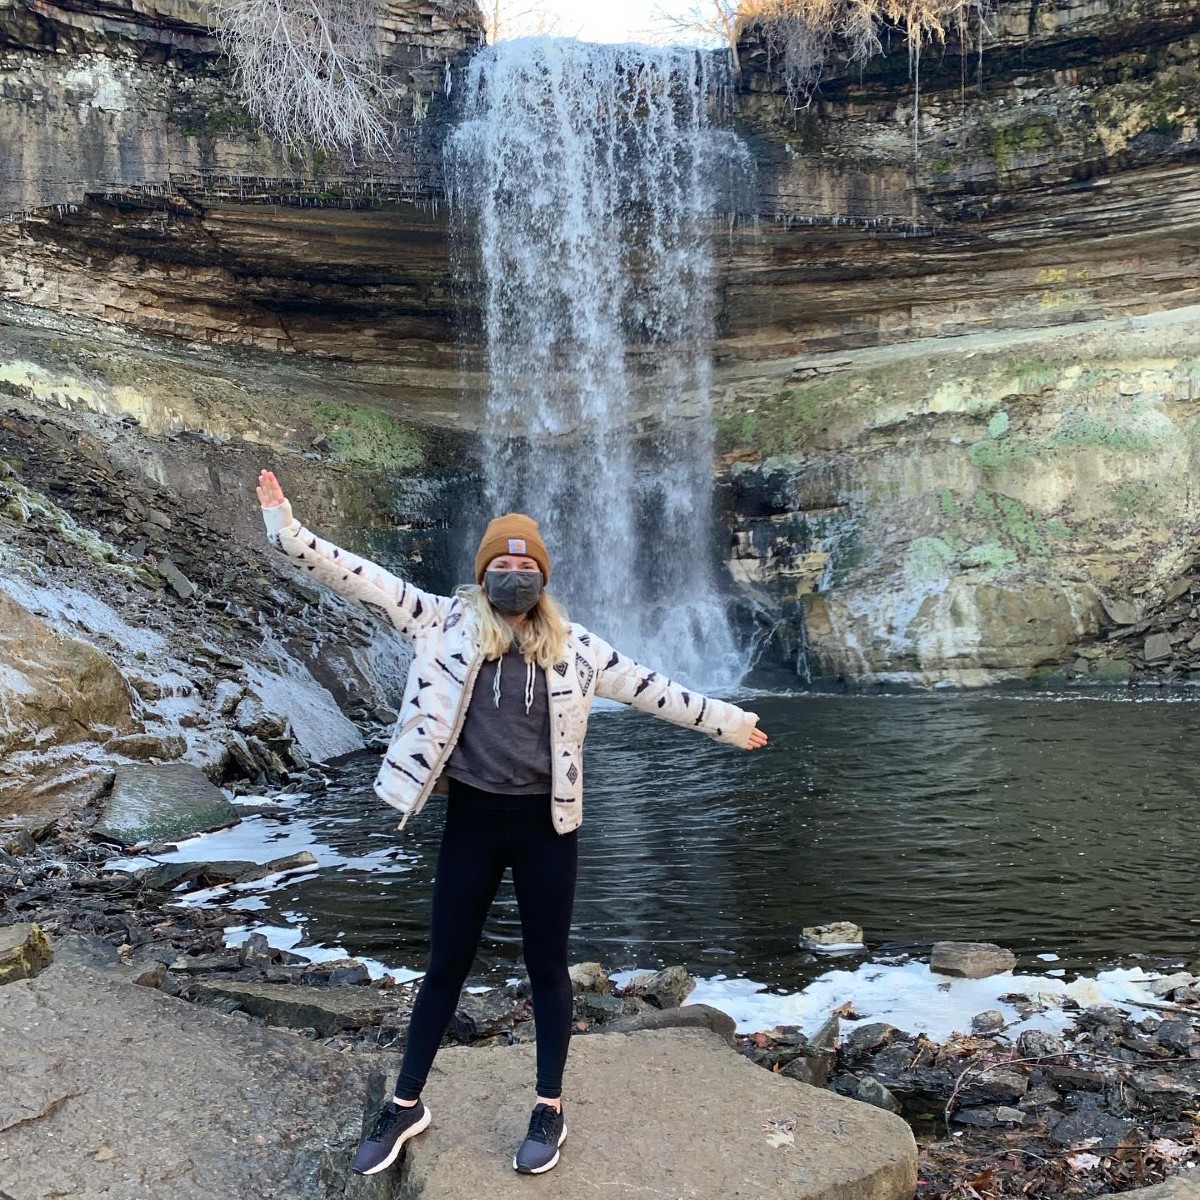 Sarah posing with her arms spread out wide in front of a waterfall and some stratified brown and green rocks. She is wearing black pants and a white jacket with a yellow winter hat and gray face mask